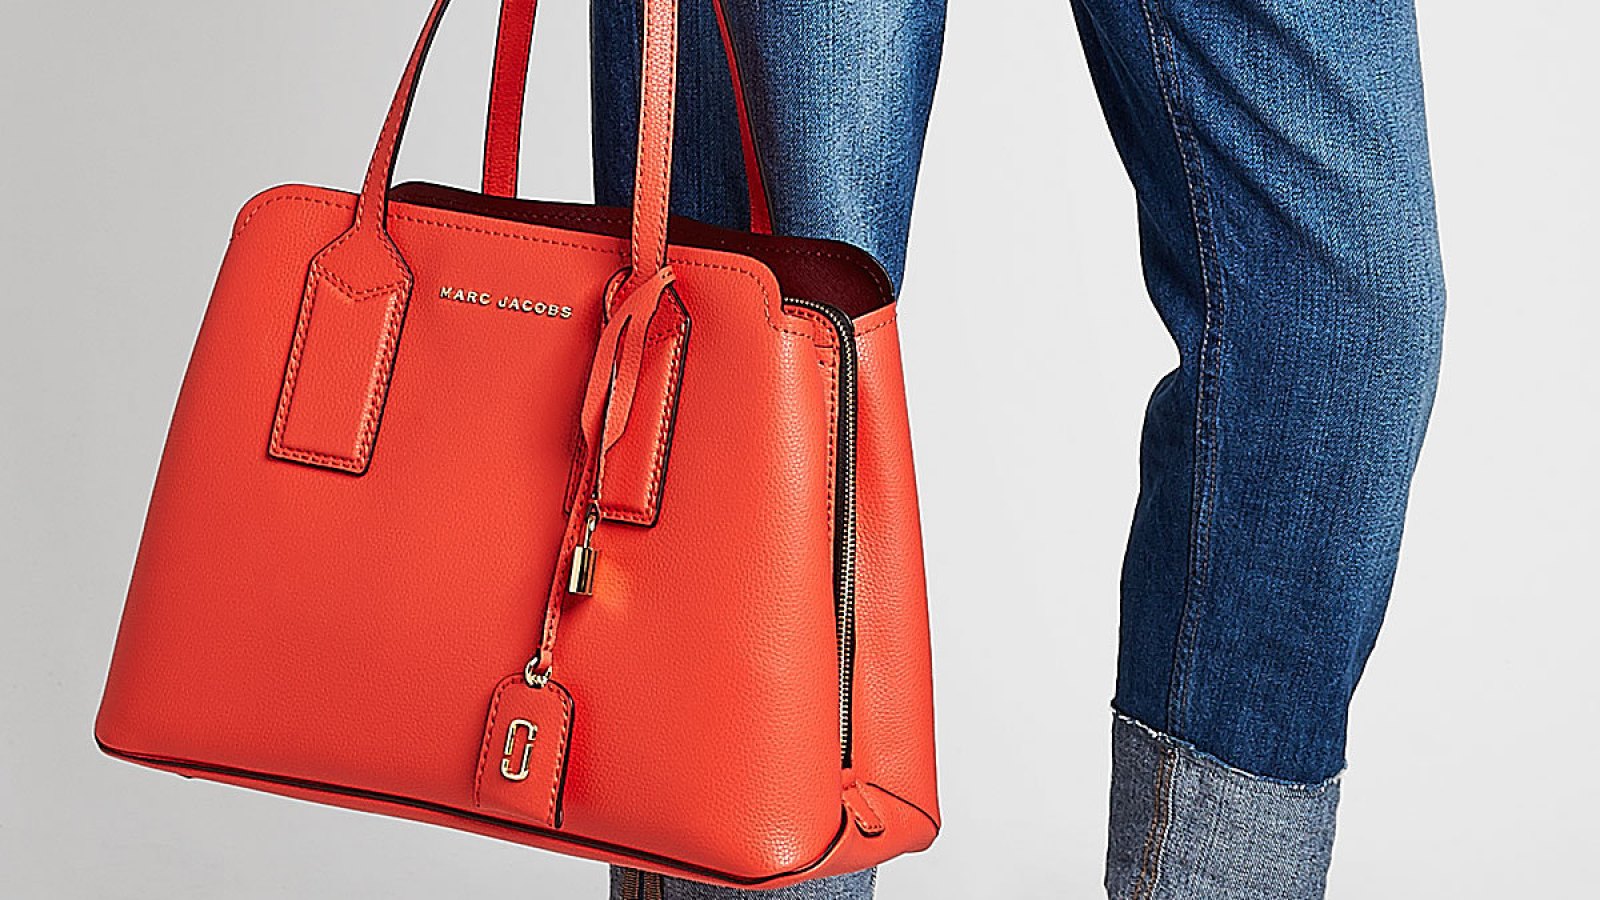 9 best Marc Jacobs Tote Bag styles we're obsessed with